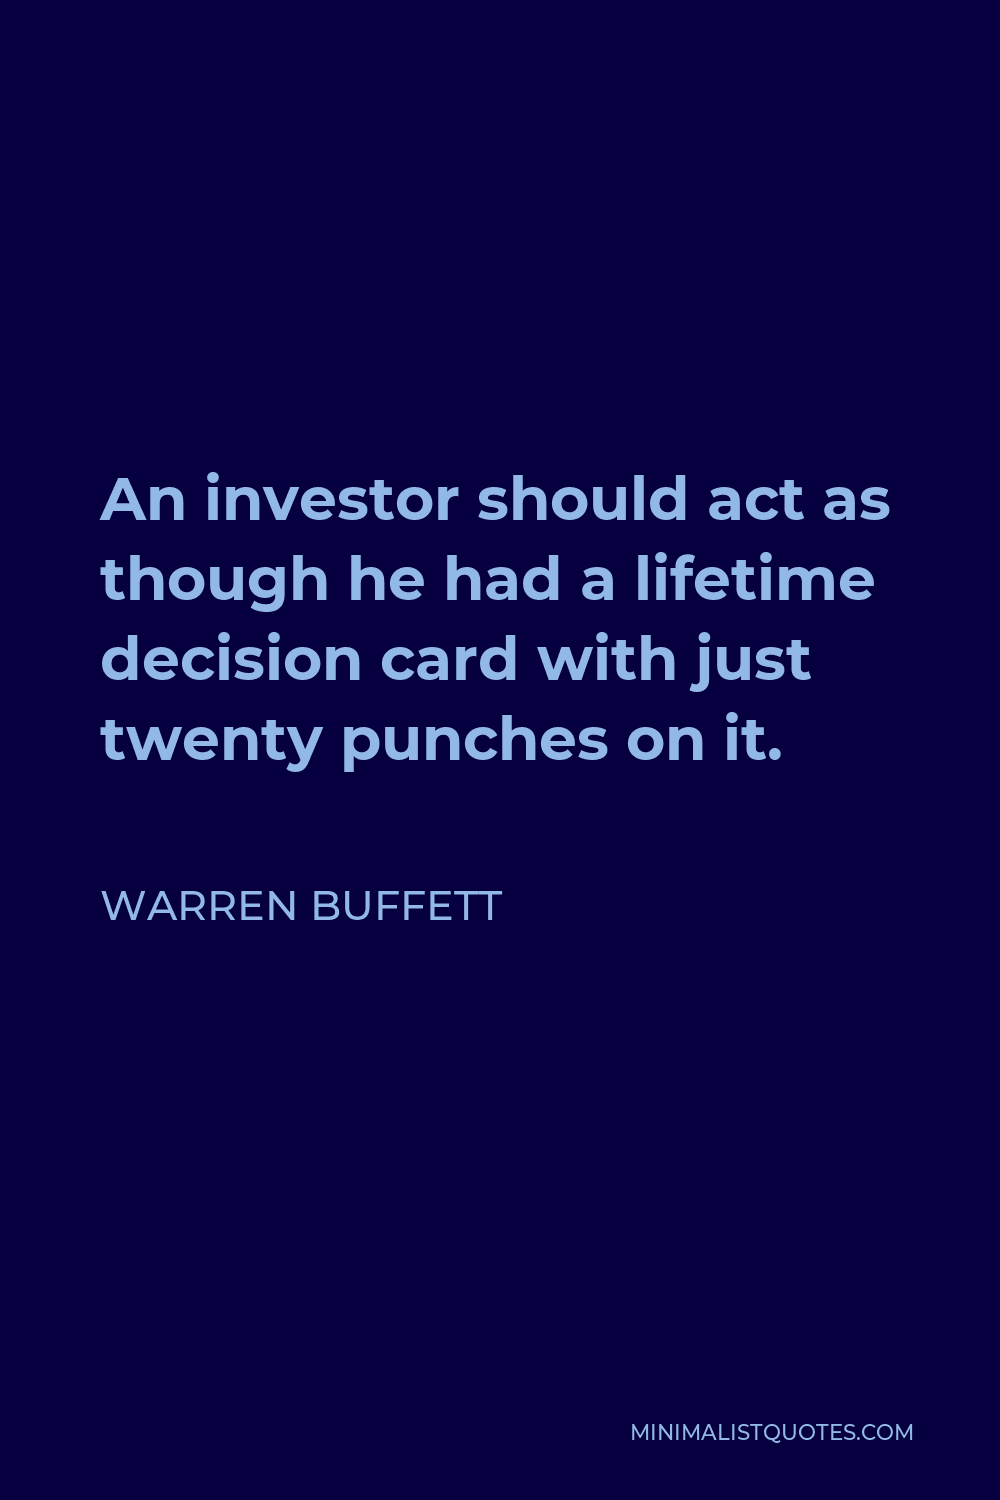 Warren Buffett Quote - An investor should act as though he had a lifetime decision card with just twenty punches on it.